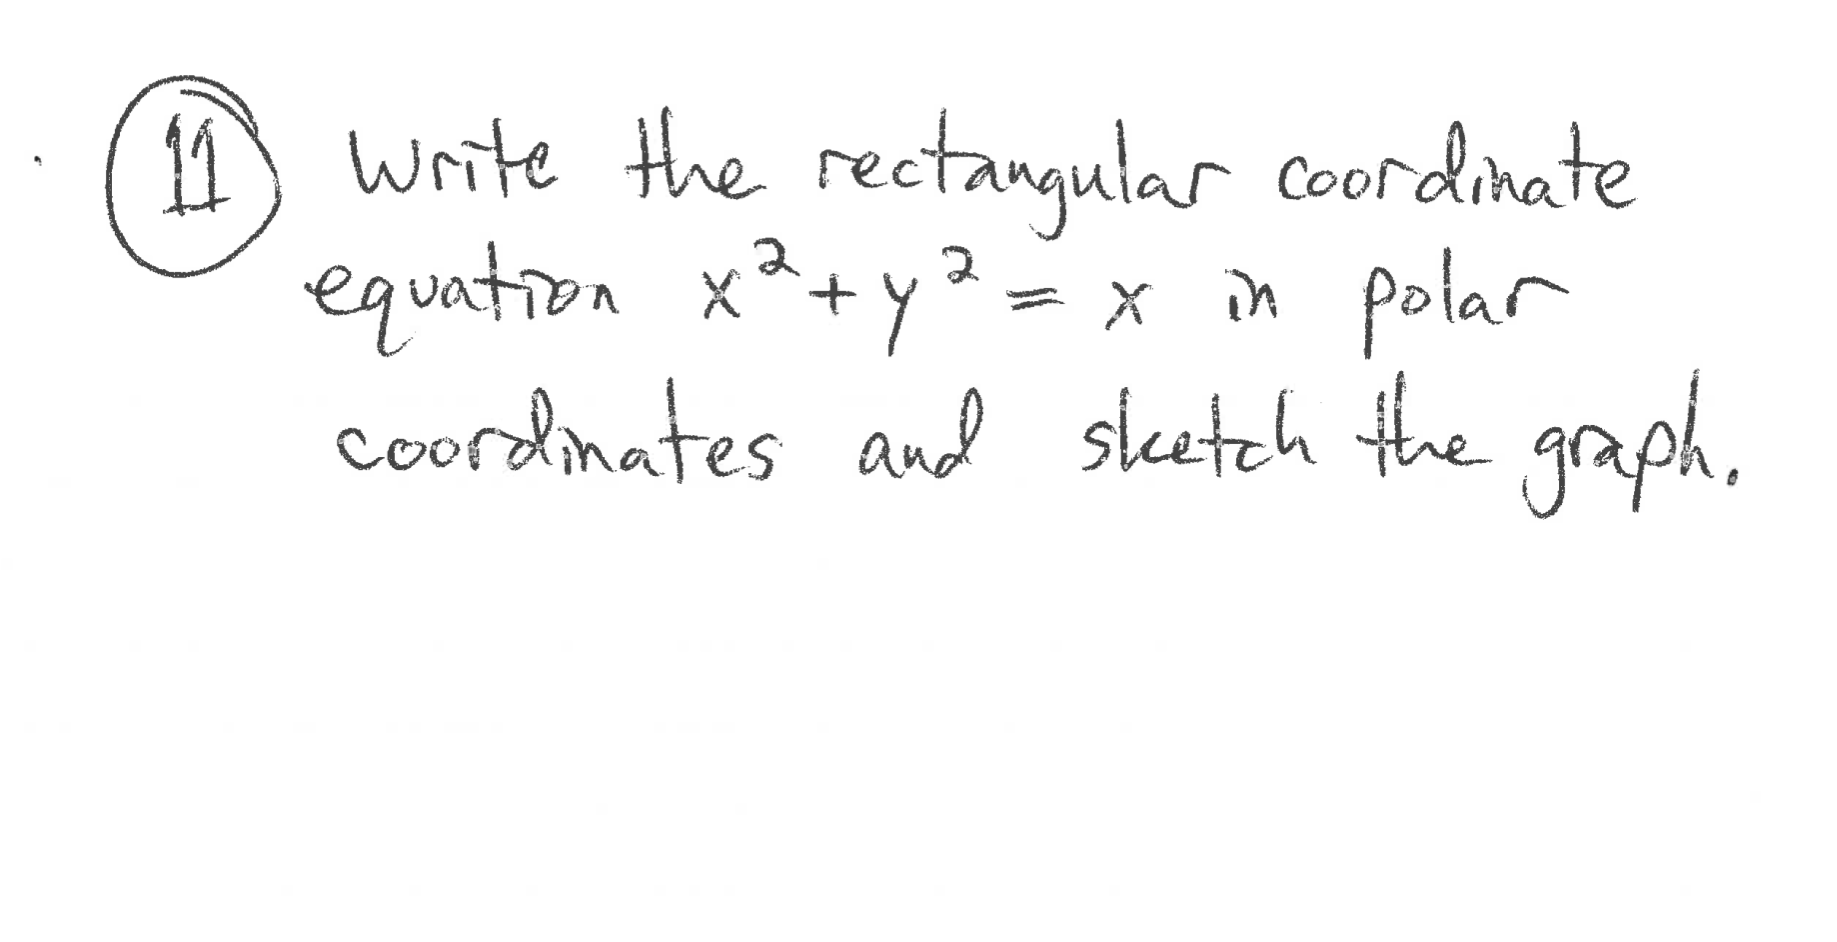 11 write the rectanqular coordinate
equation x2+y²=
coordmates and sleetch the graph,
in polarr
